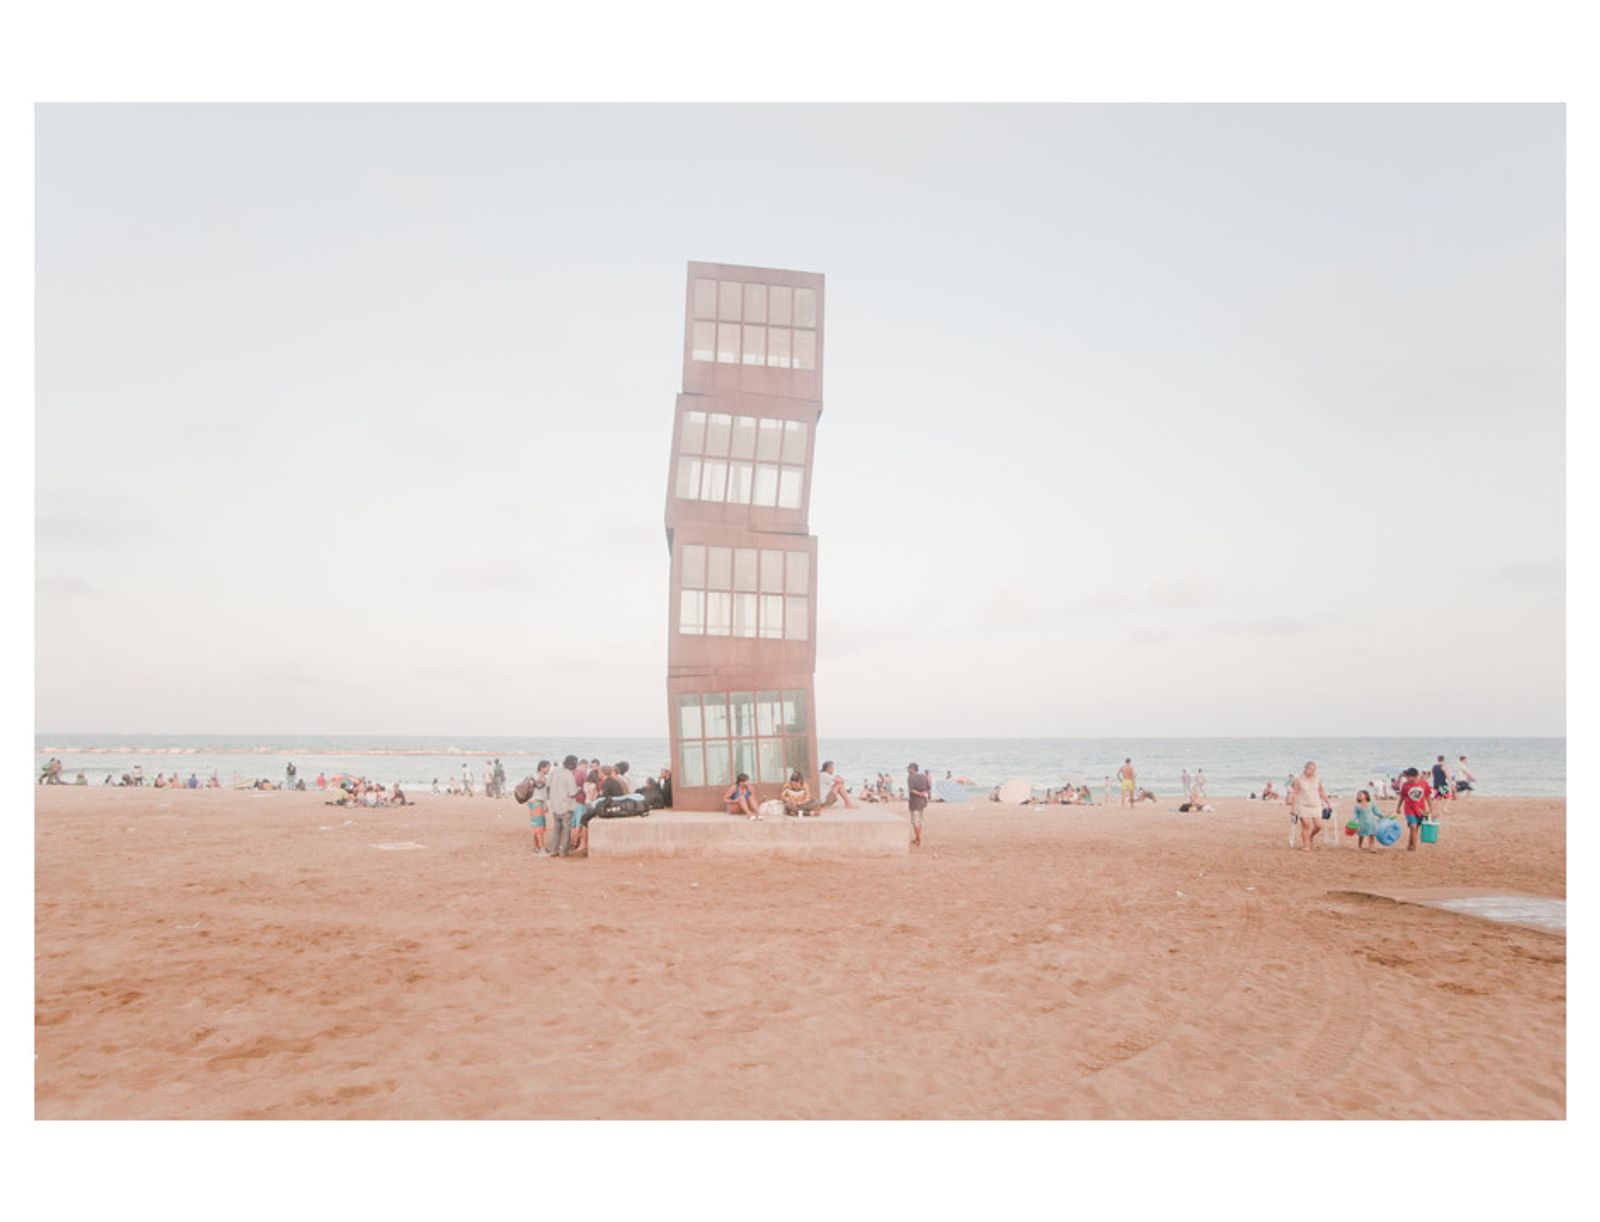 © Claudia Corrent - Image from the Barcelona photography project